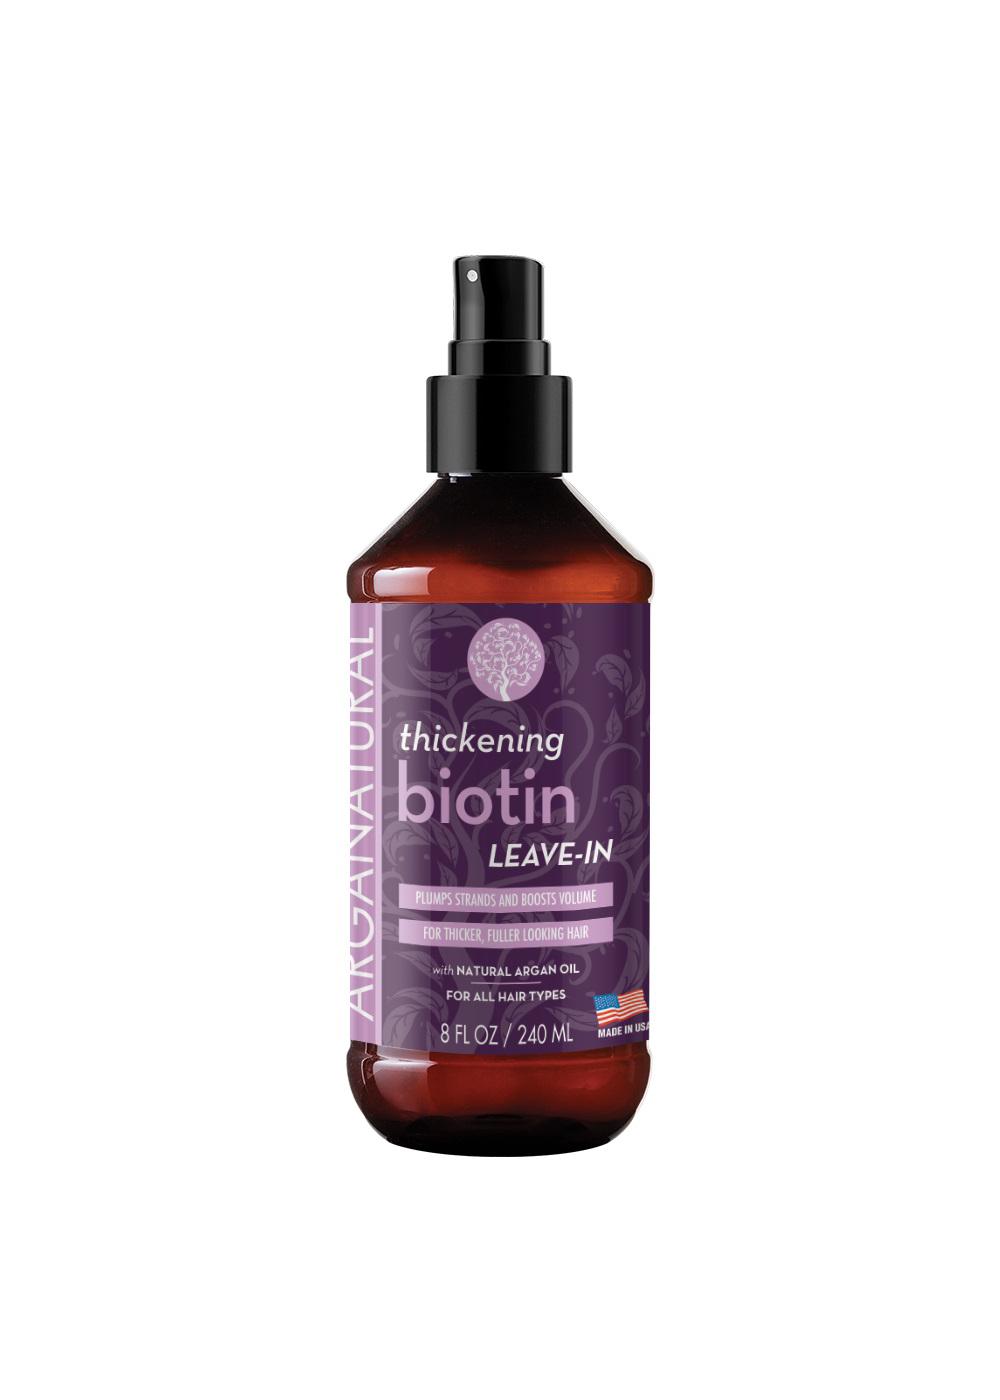 Arganatural Thick Biotin Leave In Conditioner; image 1 of 3